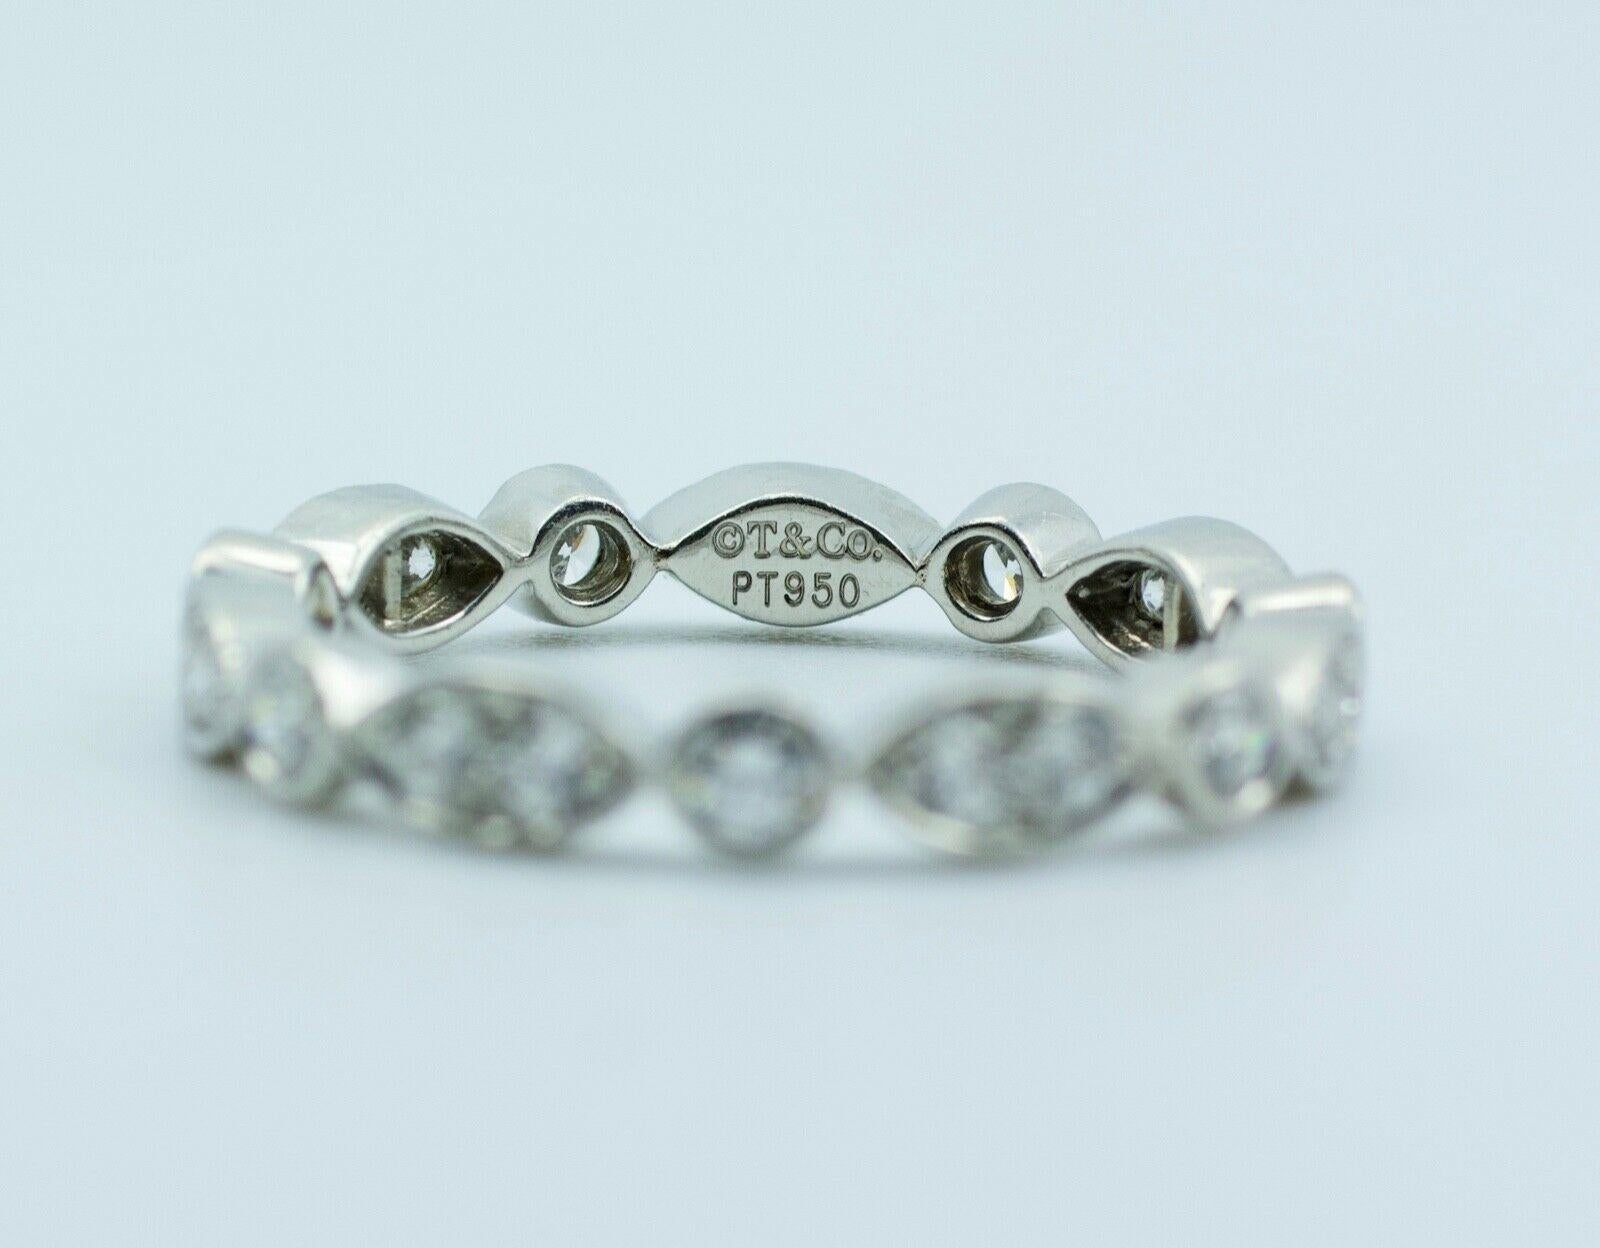 Tiffany & Co Platinum Round Diamond Eternity Band
Ring Size 6.75
3.8 Grams
 White Round Brilliant Cut Diamonds 0.61 Carats Total Weight
Color: F
Clarity: VS2

This is a beautiful Tiffany & Co. diamond band that shows off these round diamonds. It is